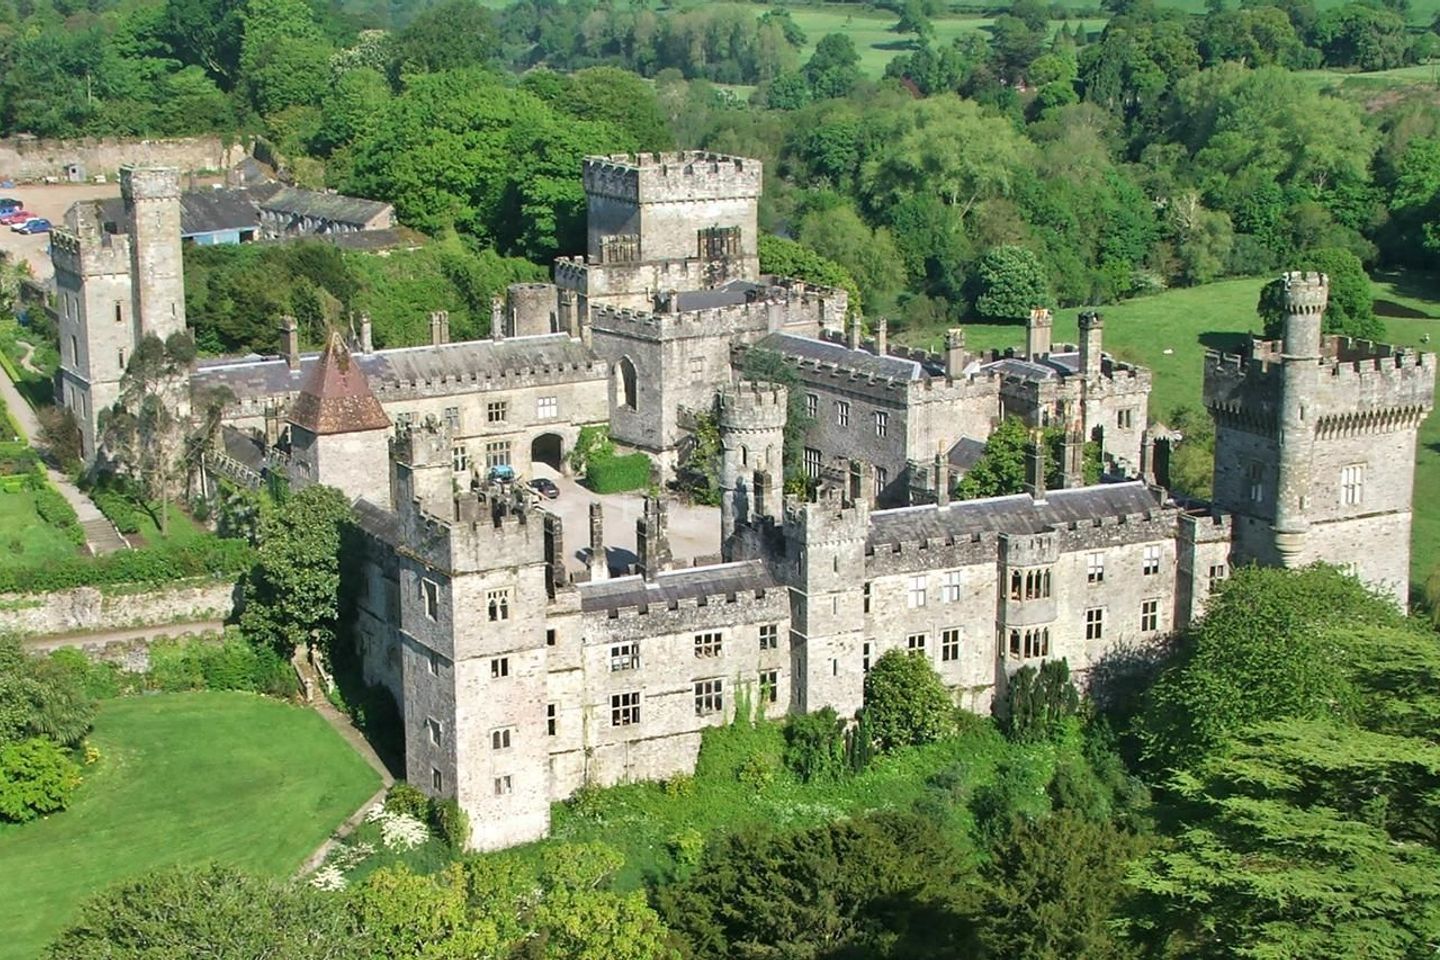 Lismore Castle, Lismore, Co. Waterford